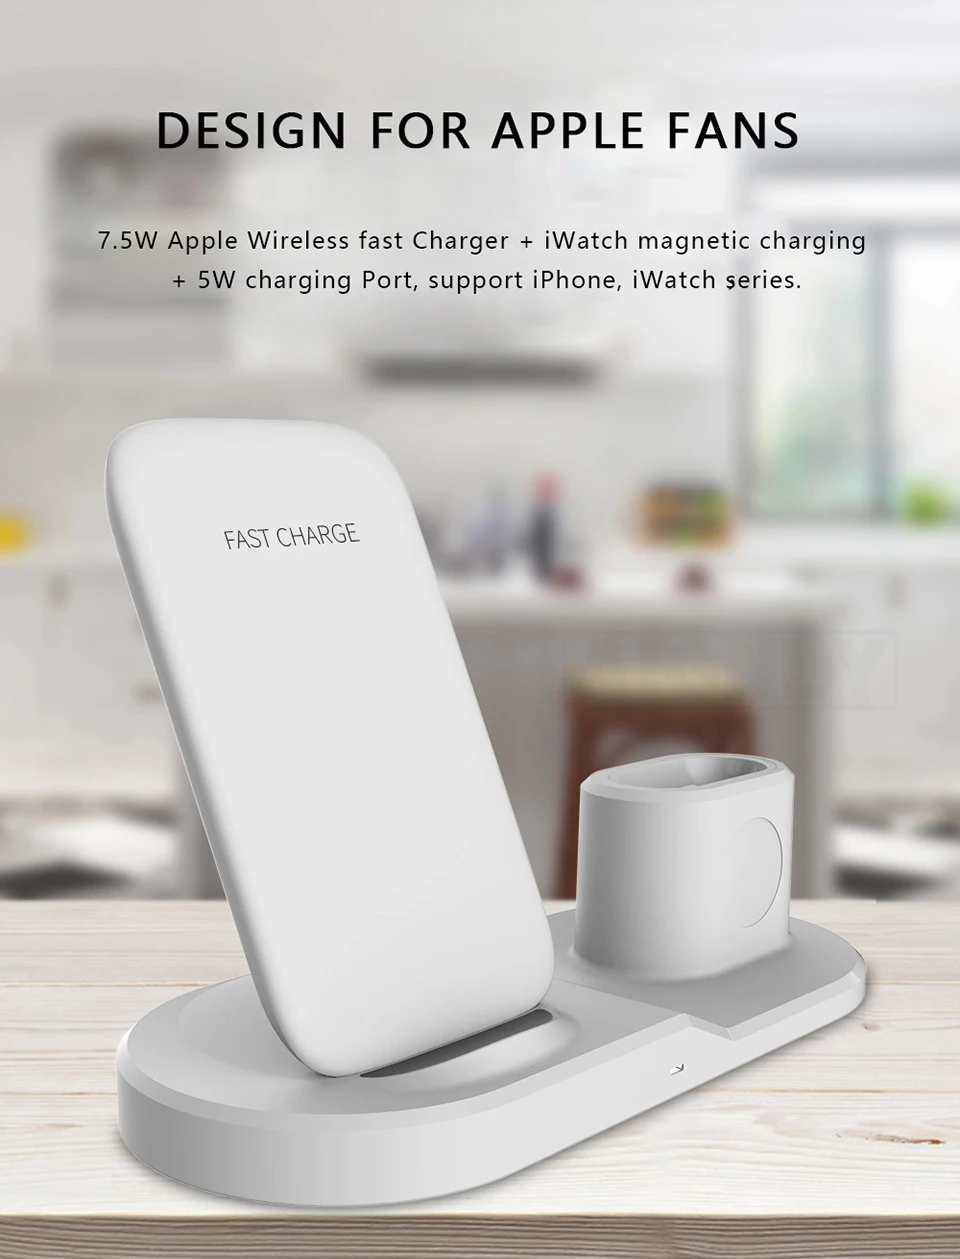 3 in 1 Apple Charge Stand designed for Apple fans